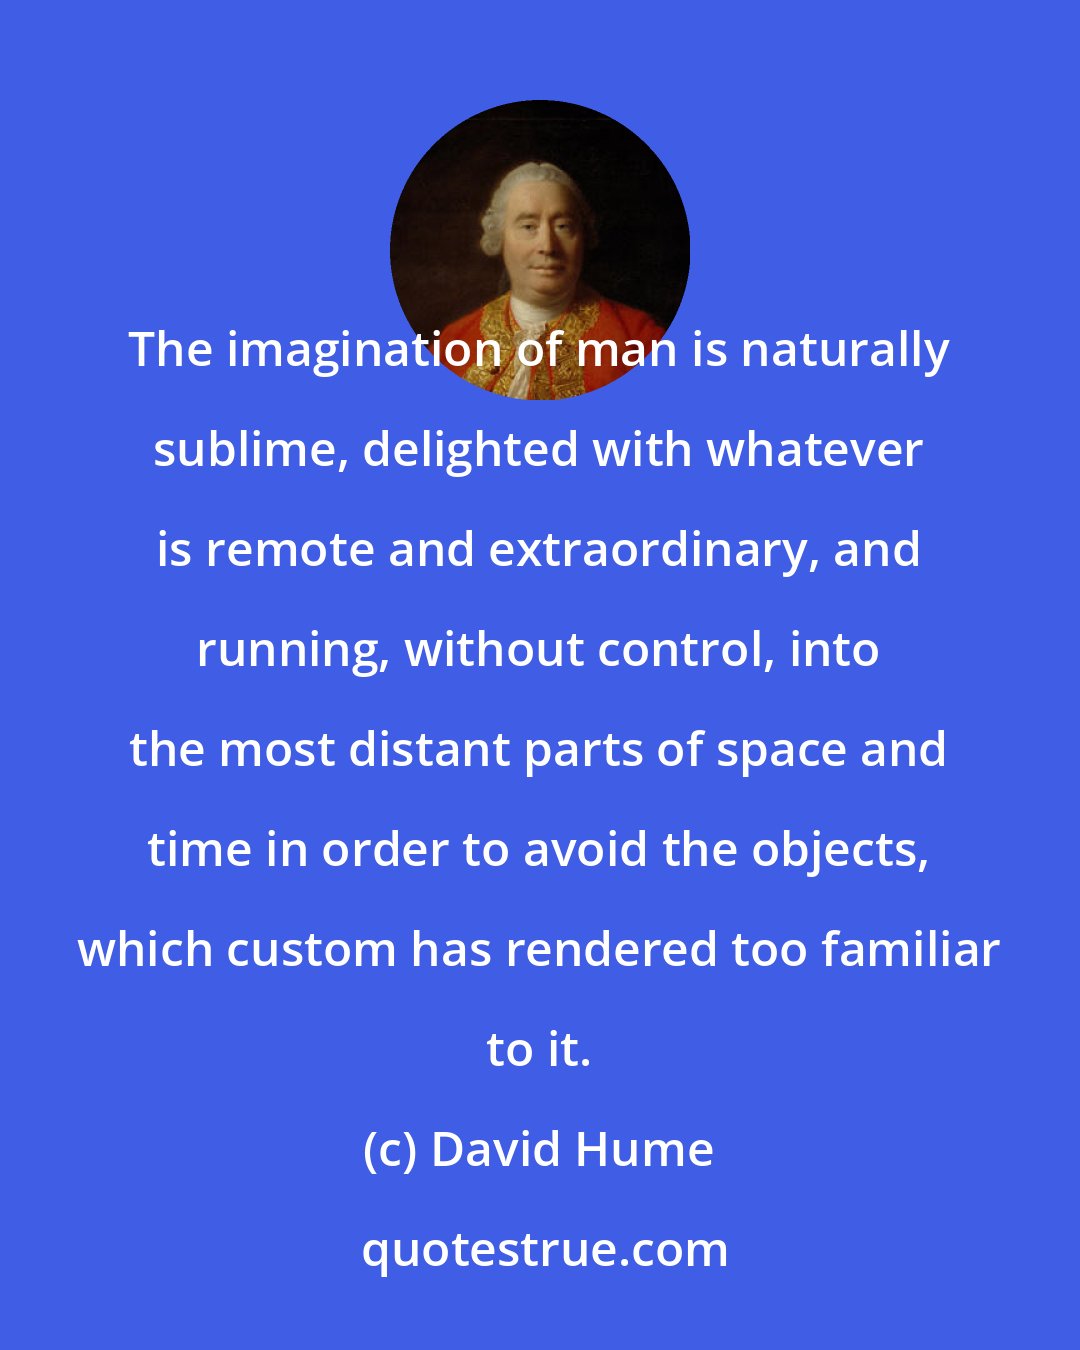 David Hume: The imagination of man is naturally sublime, delighted with whatever is remote and extraordinary, and running, without control, into the most distant parts of space and time in order to avoid the objects, which custom has rendered too familiar to it.